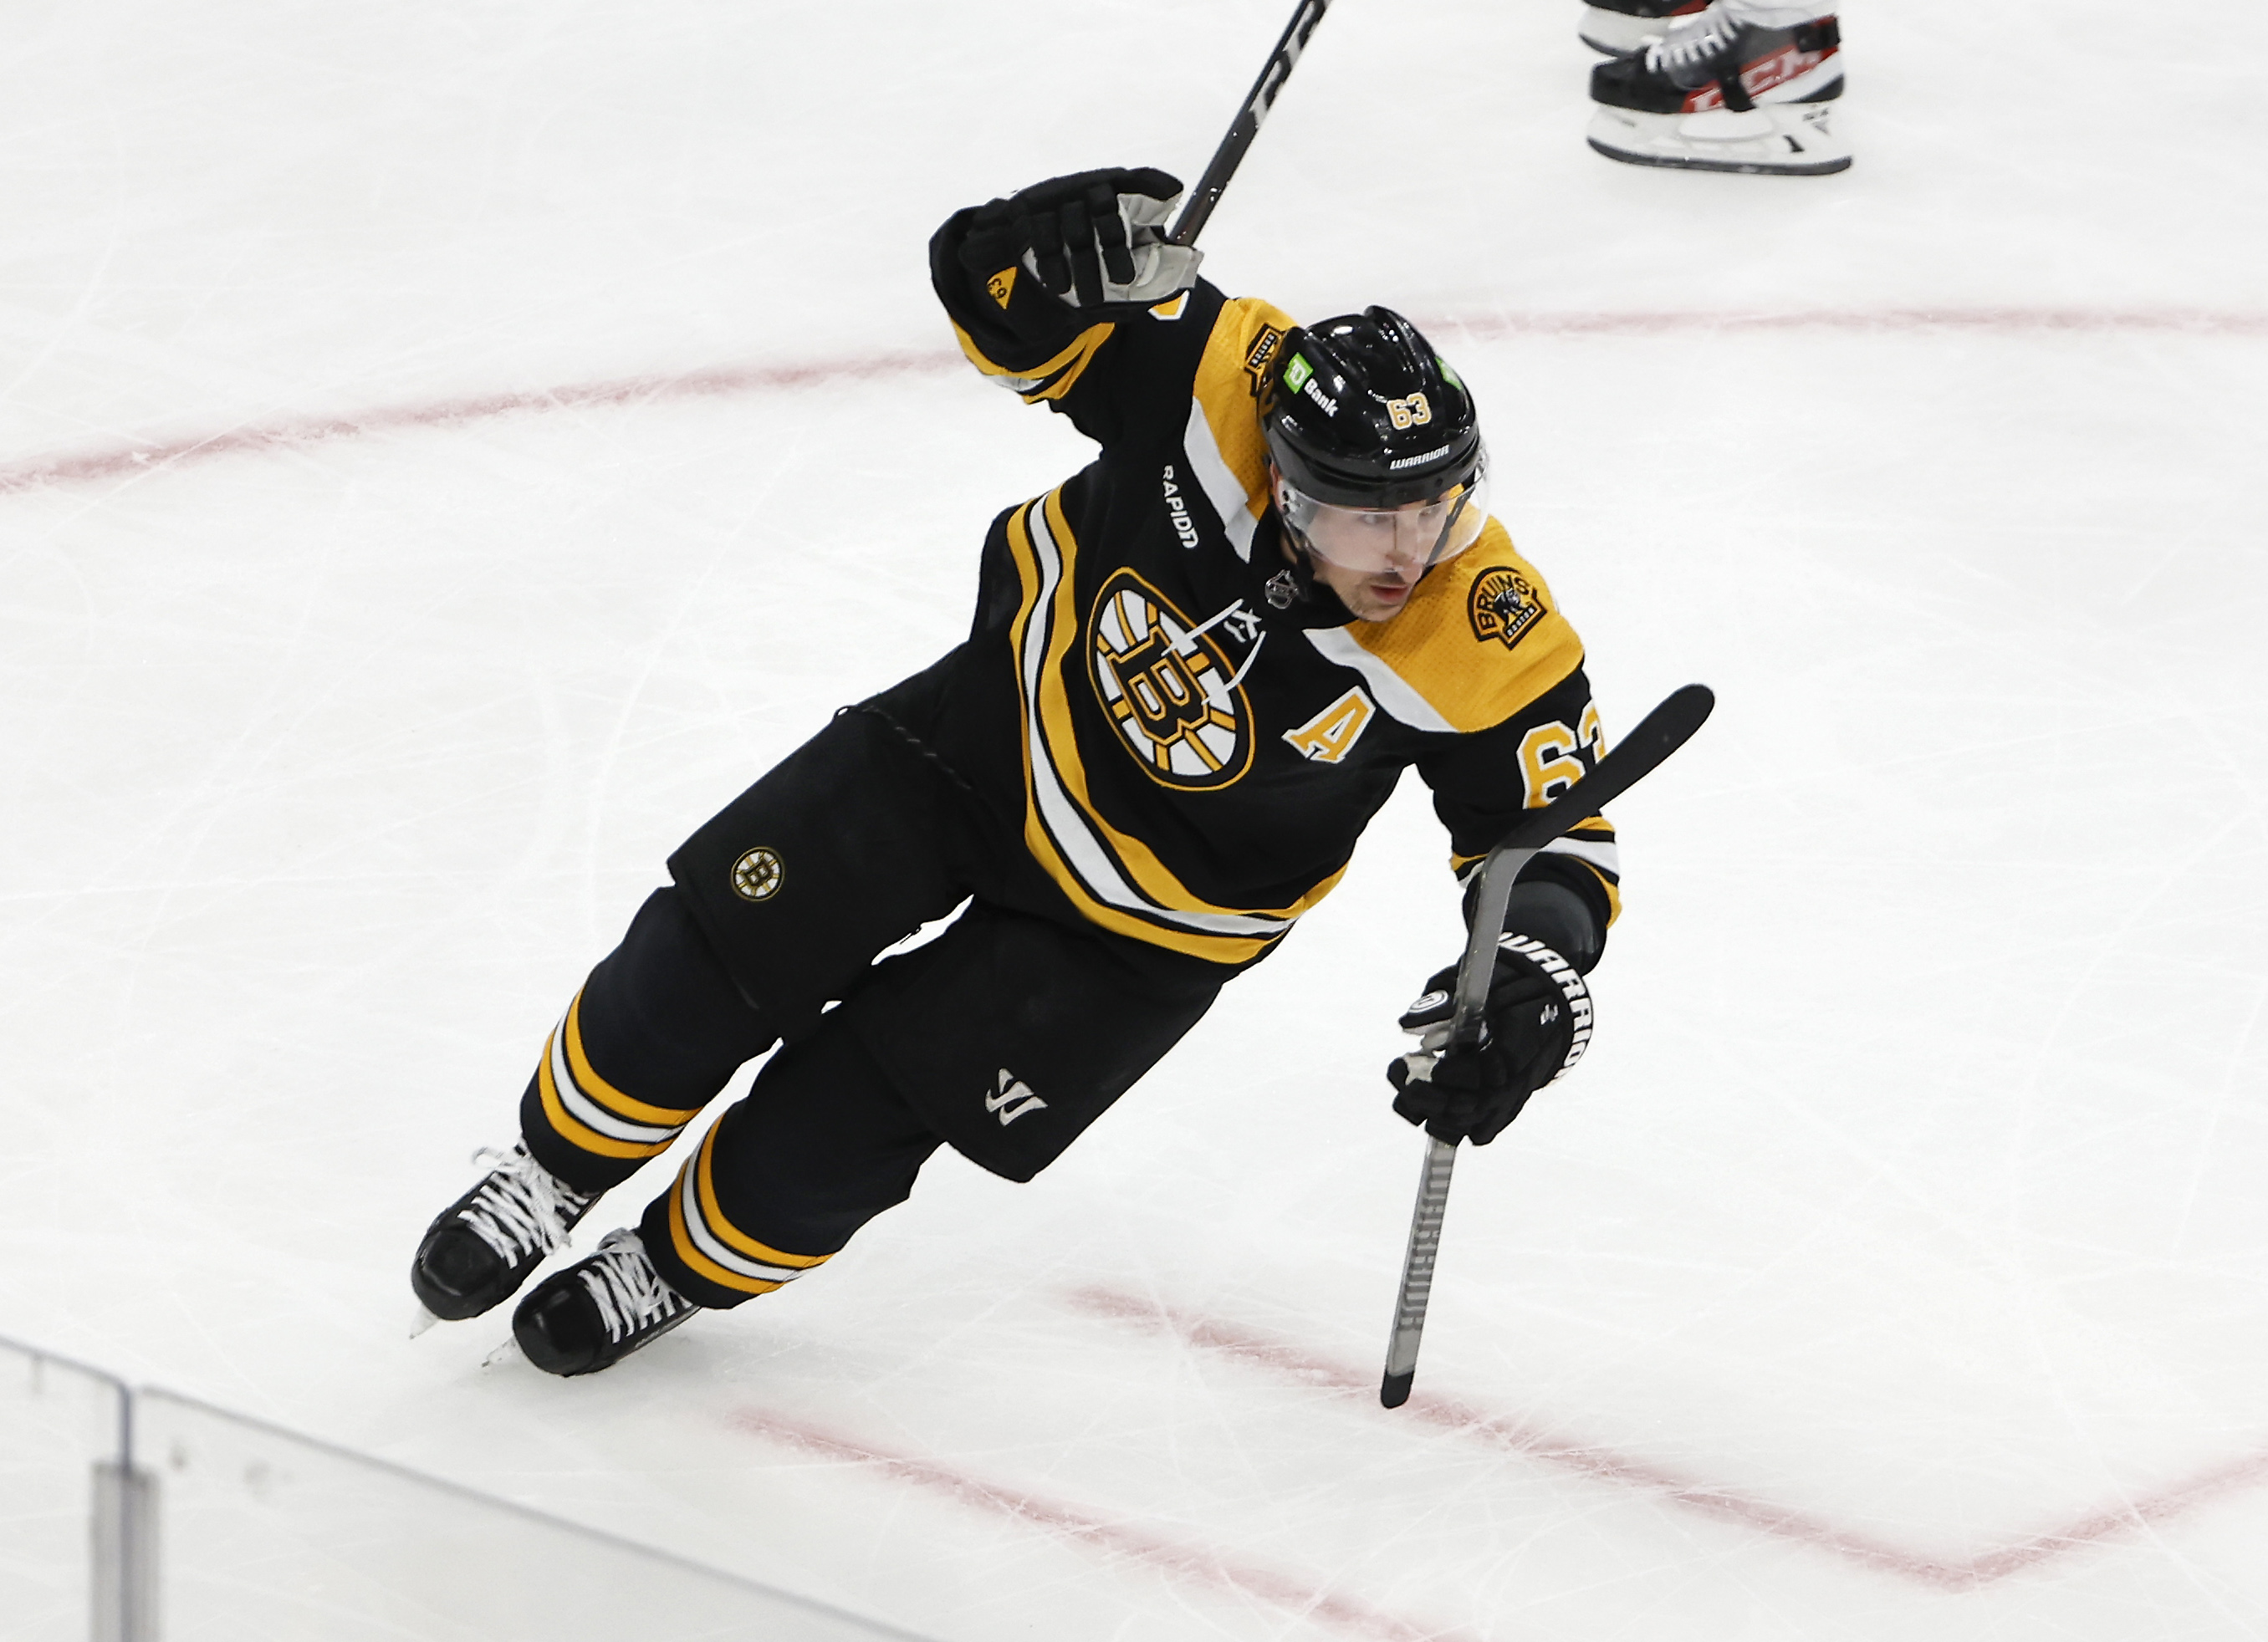 Brad Marchand named Bruins captain, McAvoy and Pastrnak named